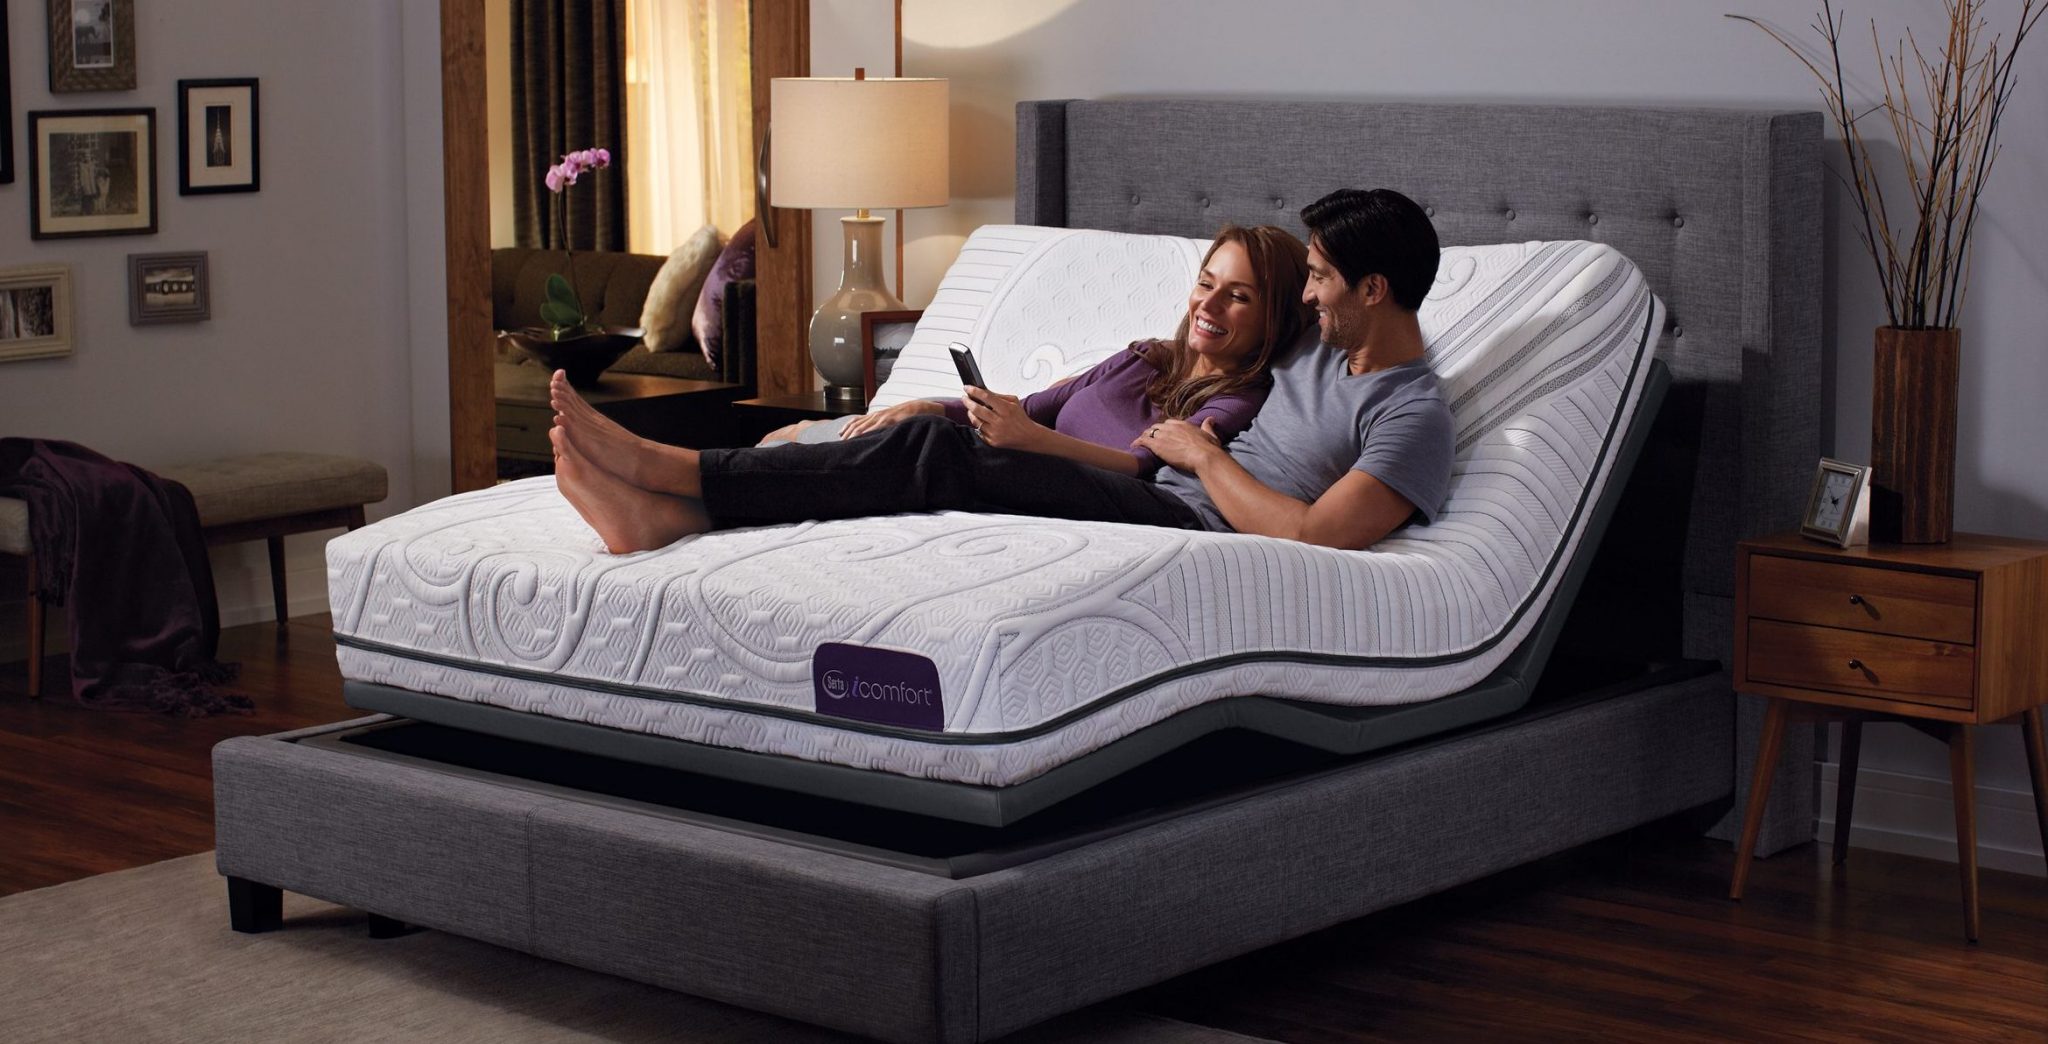 Serta Adjustable Bases: Which Fits Your Needs? - Best Mattress